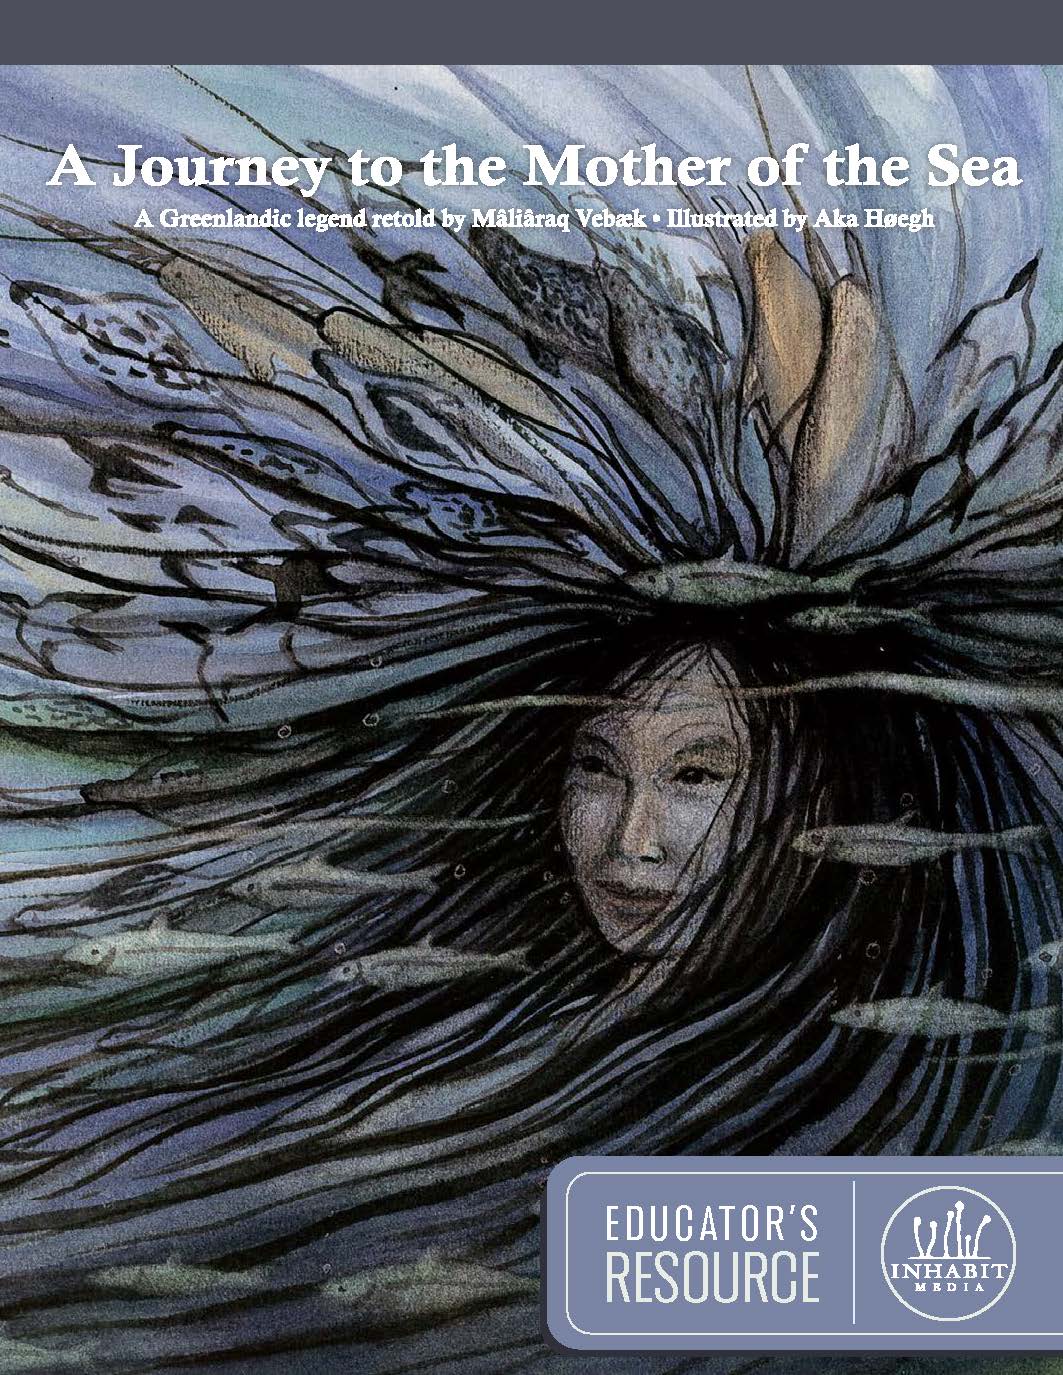 A Journey to the Mother of the Sea Educator's Resource